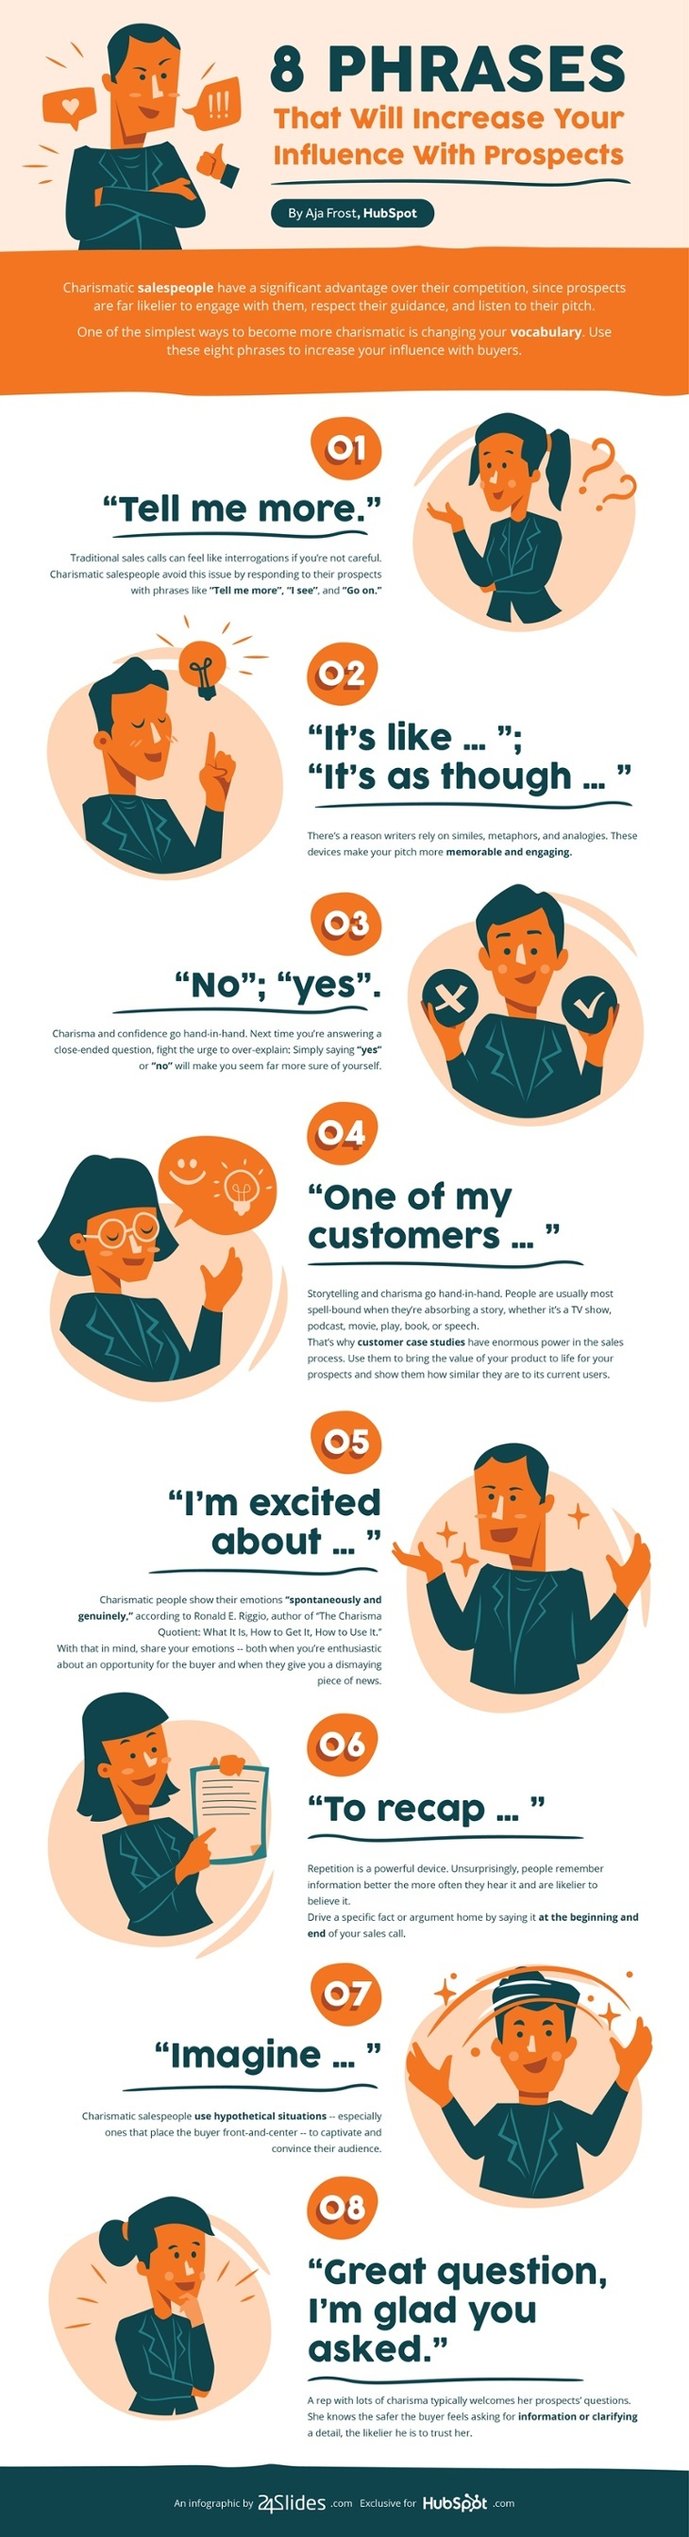 Want Charisma-This Infographic Shares Eight Ways to Develop Yours -Infographic.jpg